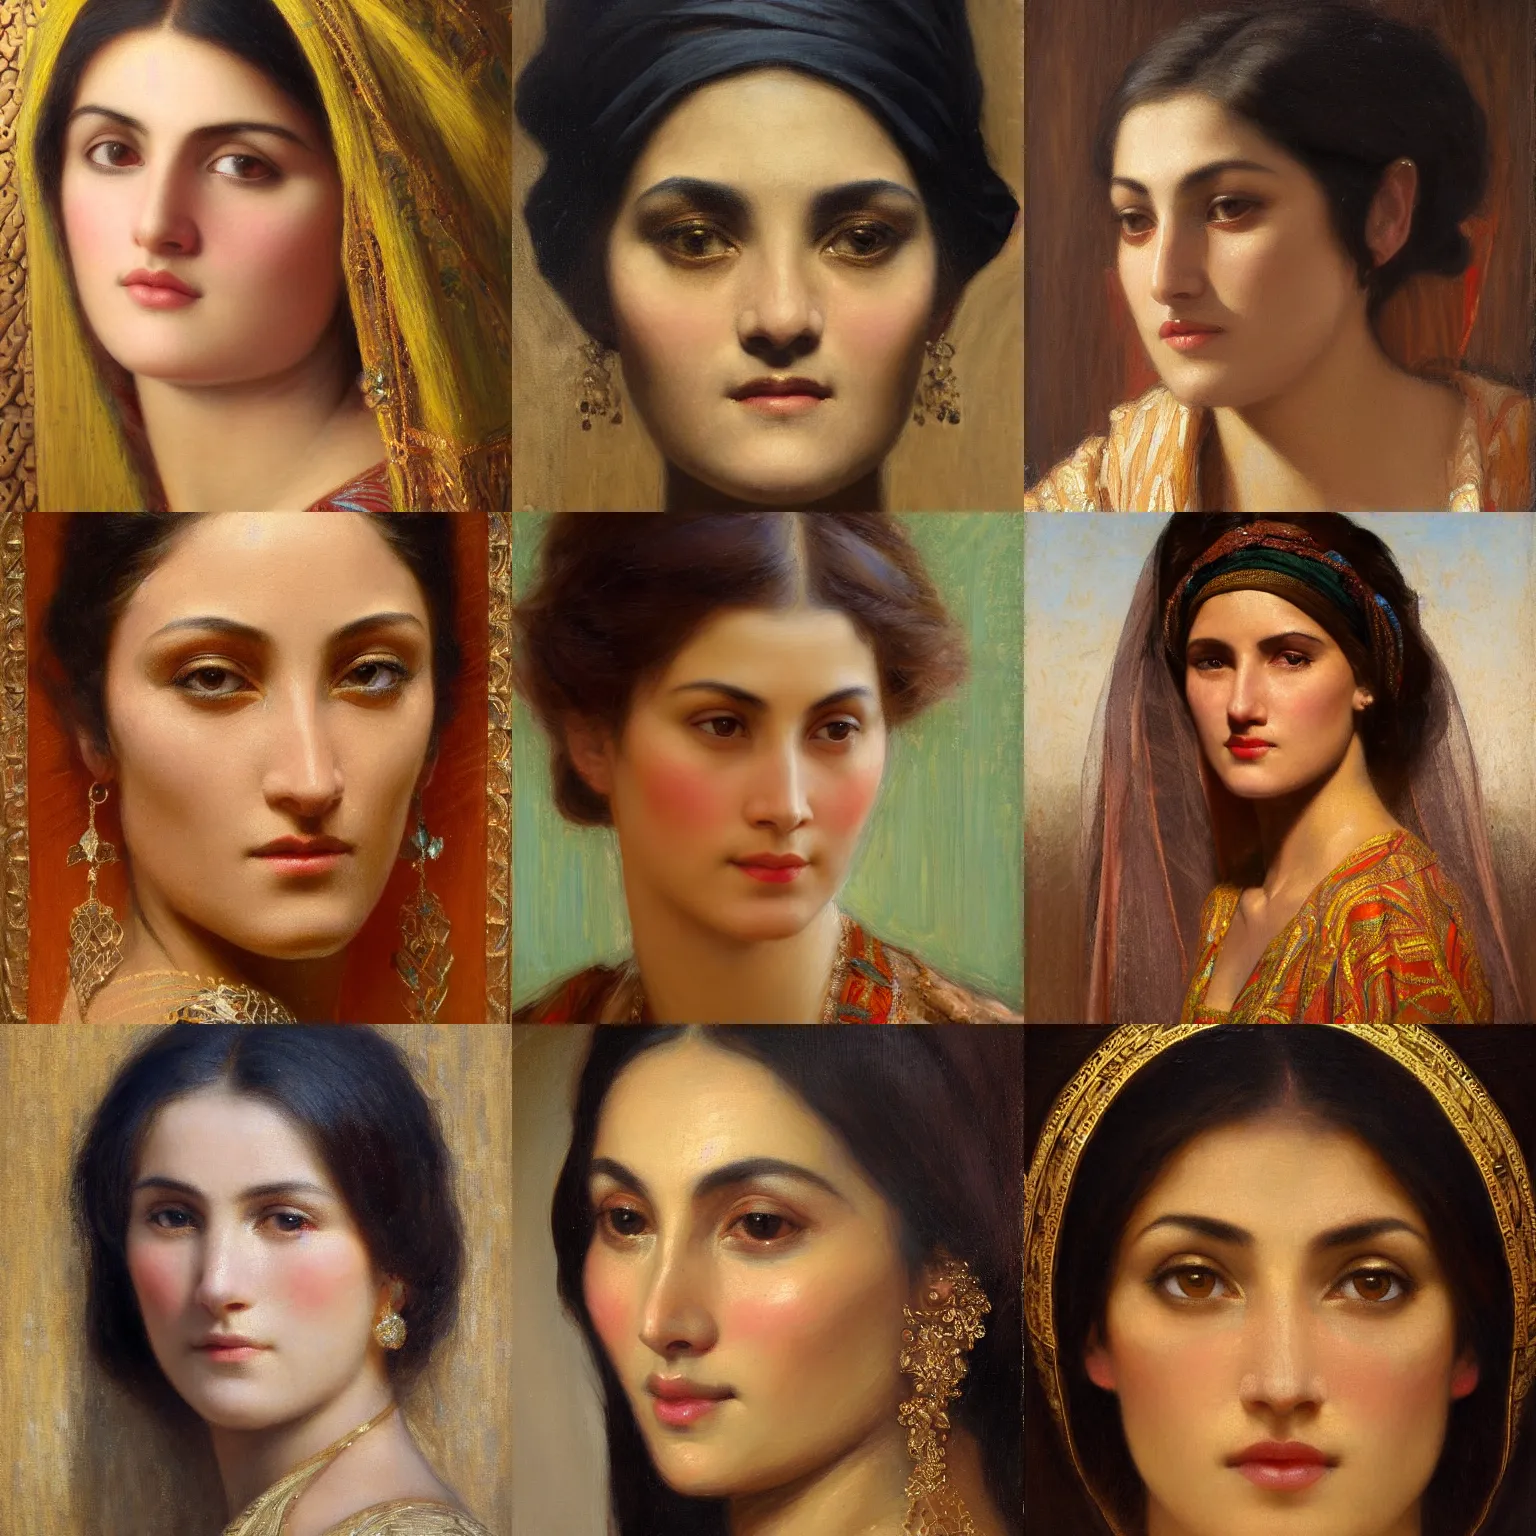 Prompt: orientalism face detail of a beautiful woman with striking eyes by edwin longsden long and theodore ralli and nasreddine dinet and adam styka, masterful intricate art. oil on canvas, excellent lighting, high detail 8 k